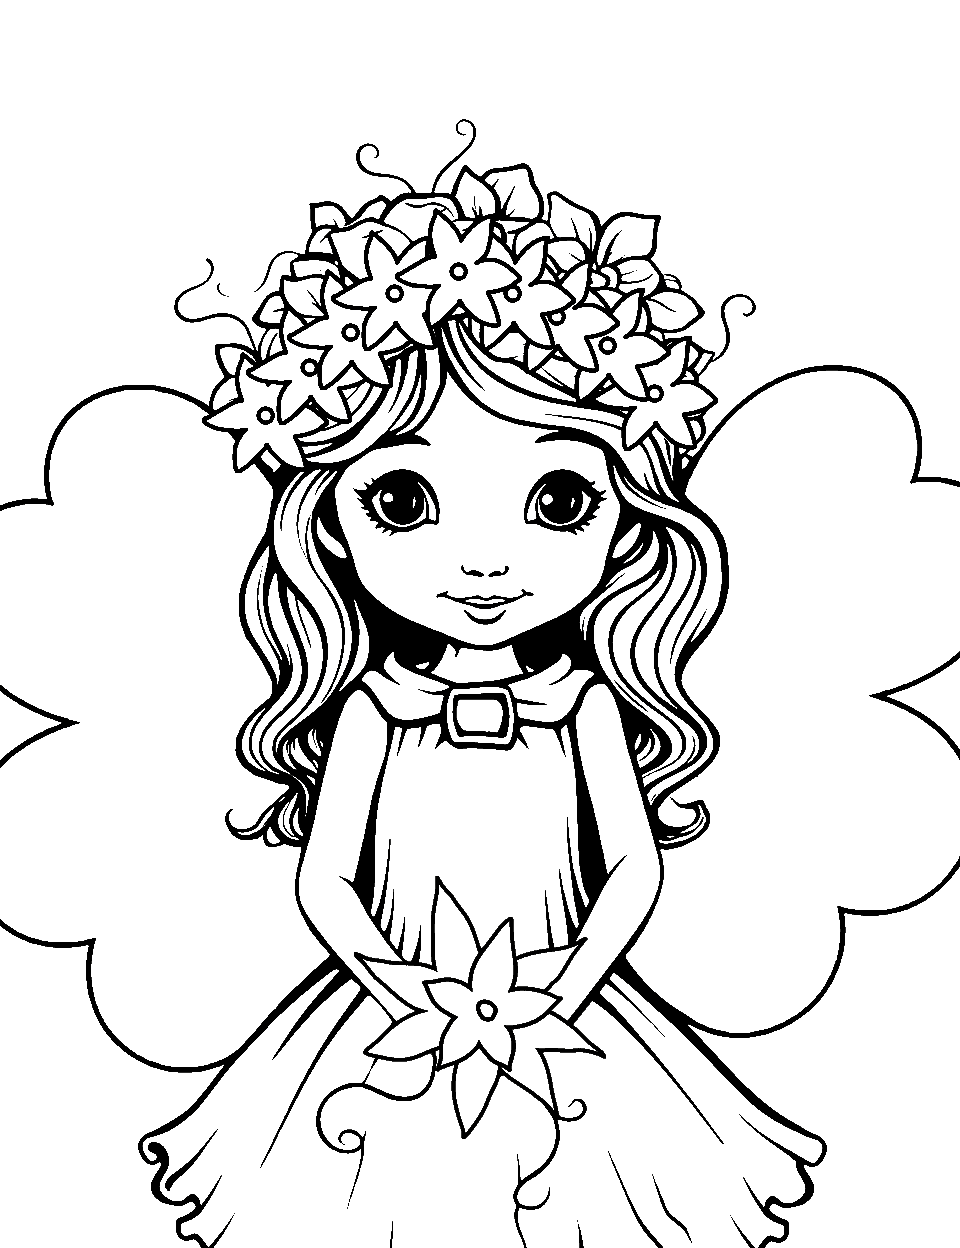 Irish Fairy with Clover Wings Coloring Page - A delicate fairy with wings shaped like clovers floating in the air.